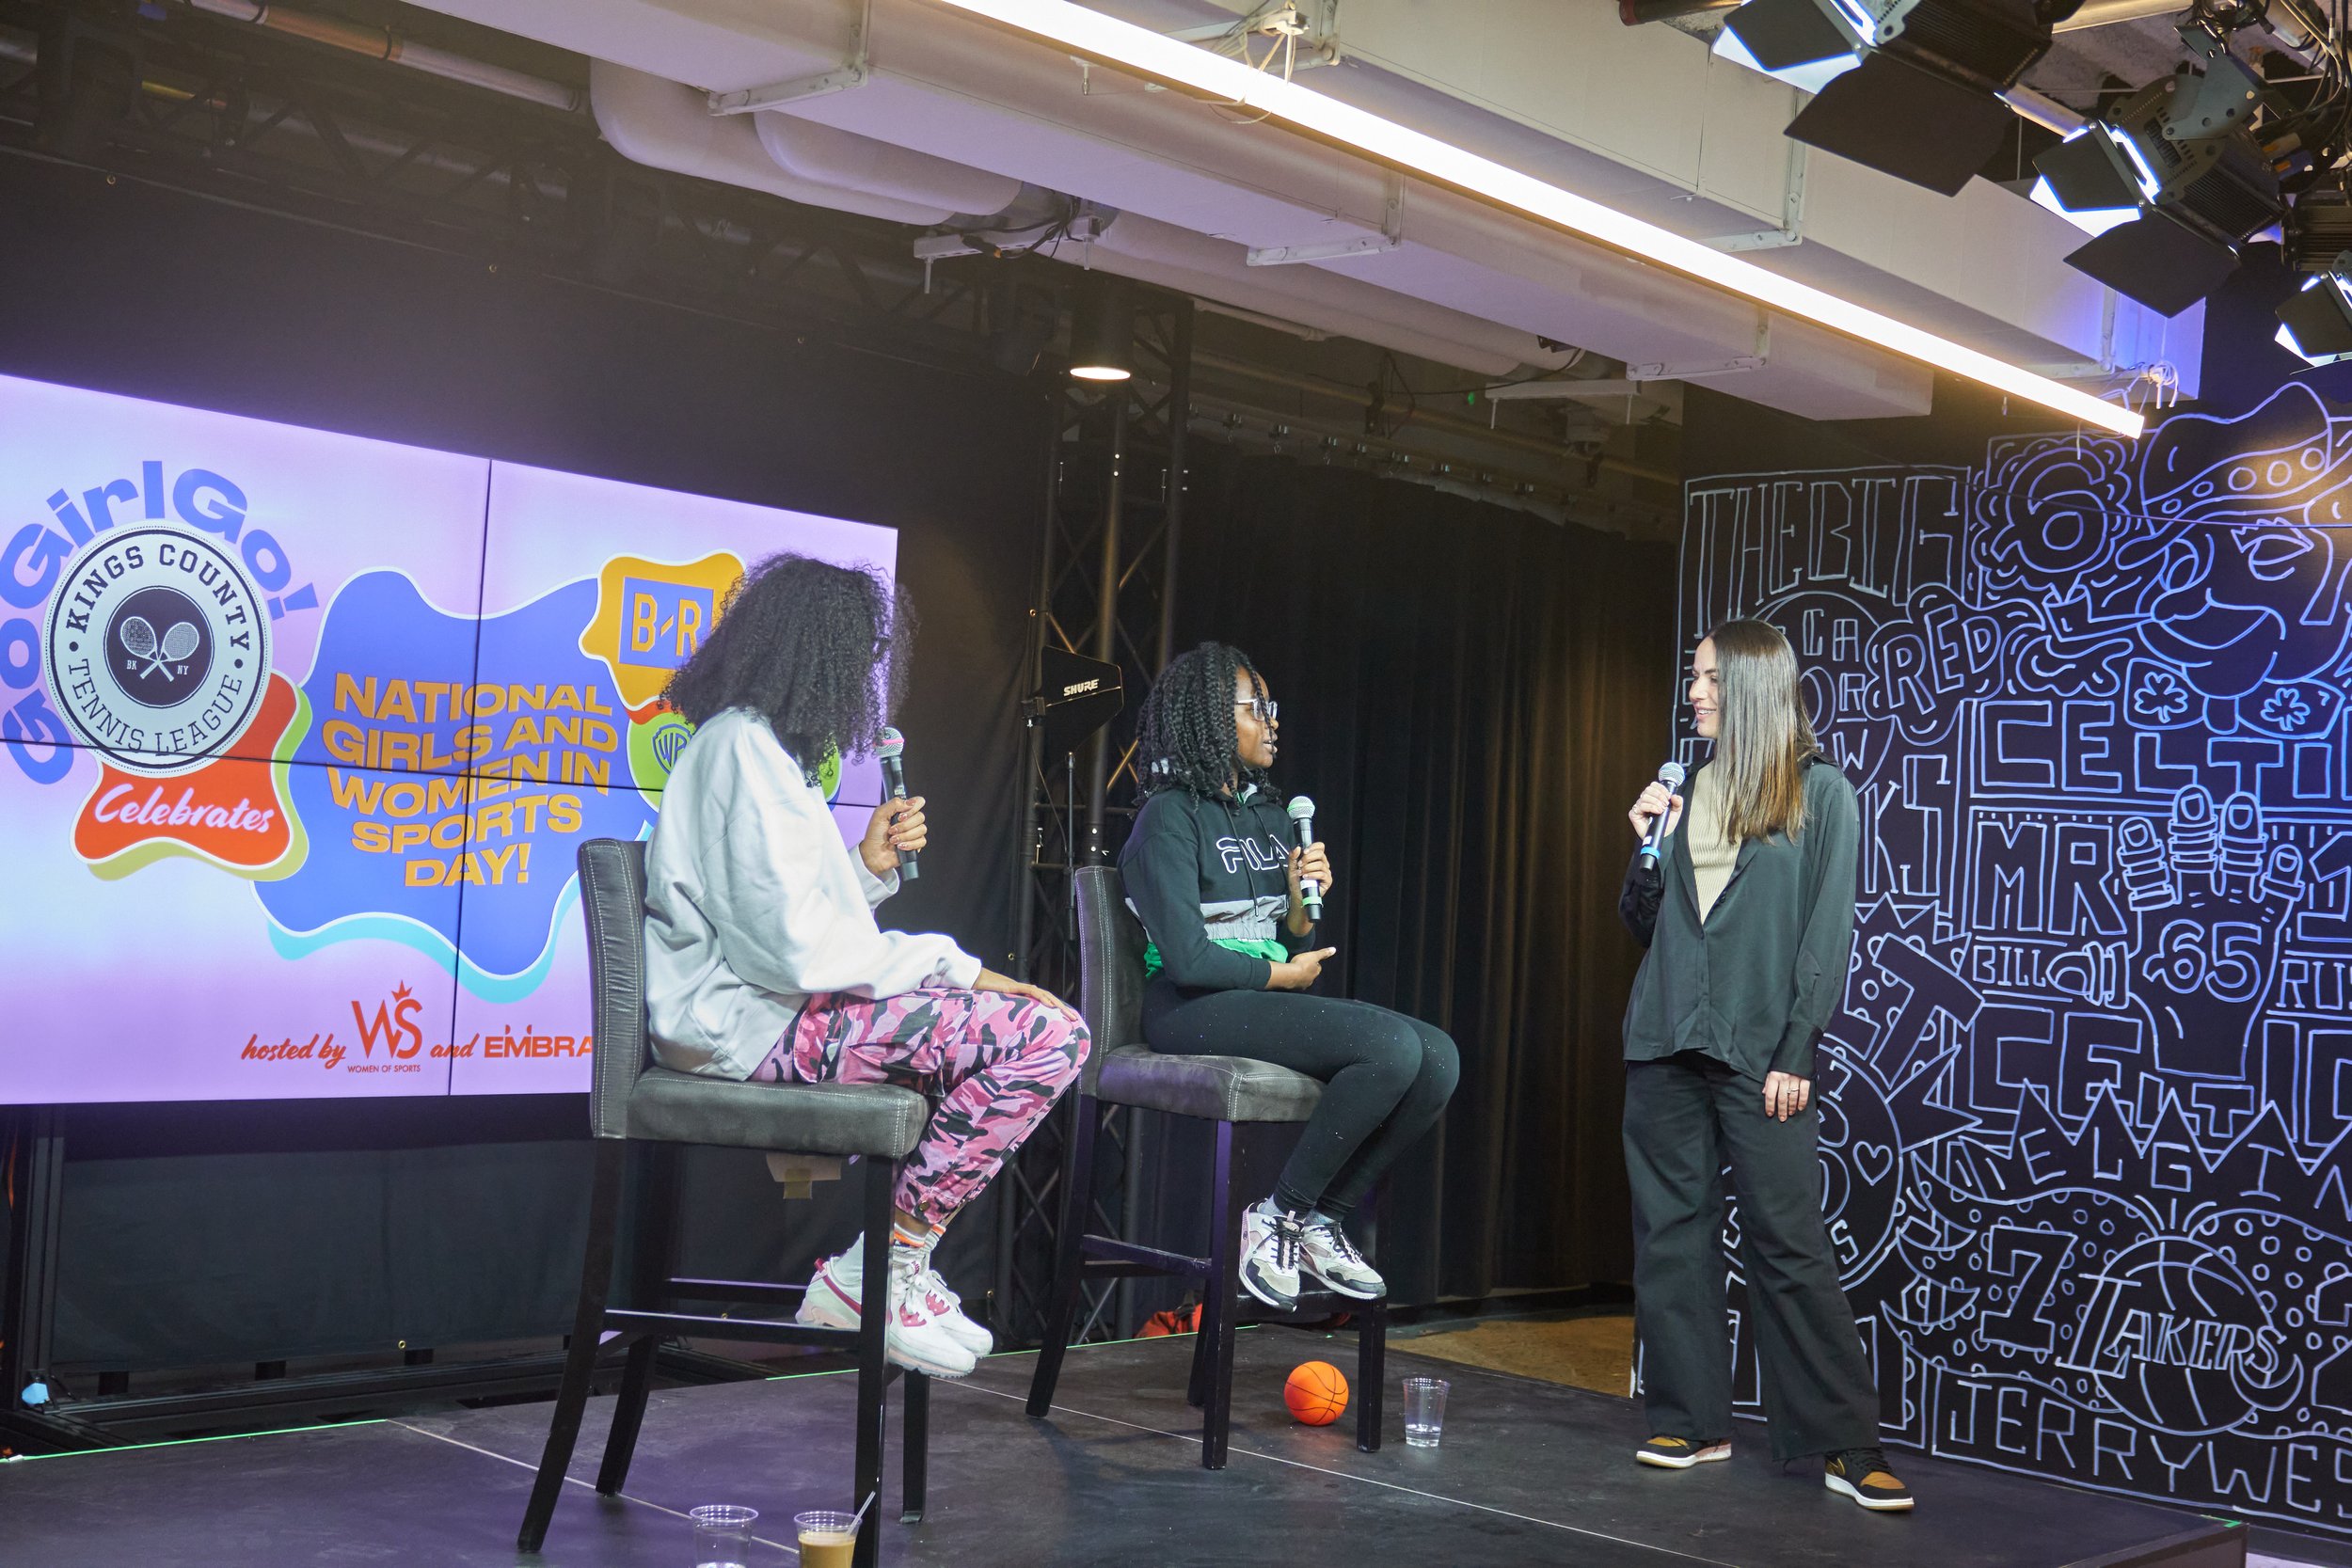 GGG National Girls And Women in Sports Day at Bleacher Report 02.01.2023 (30).jpg